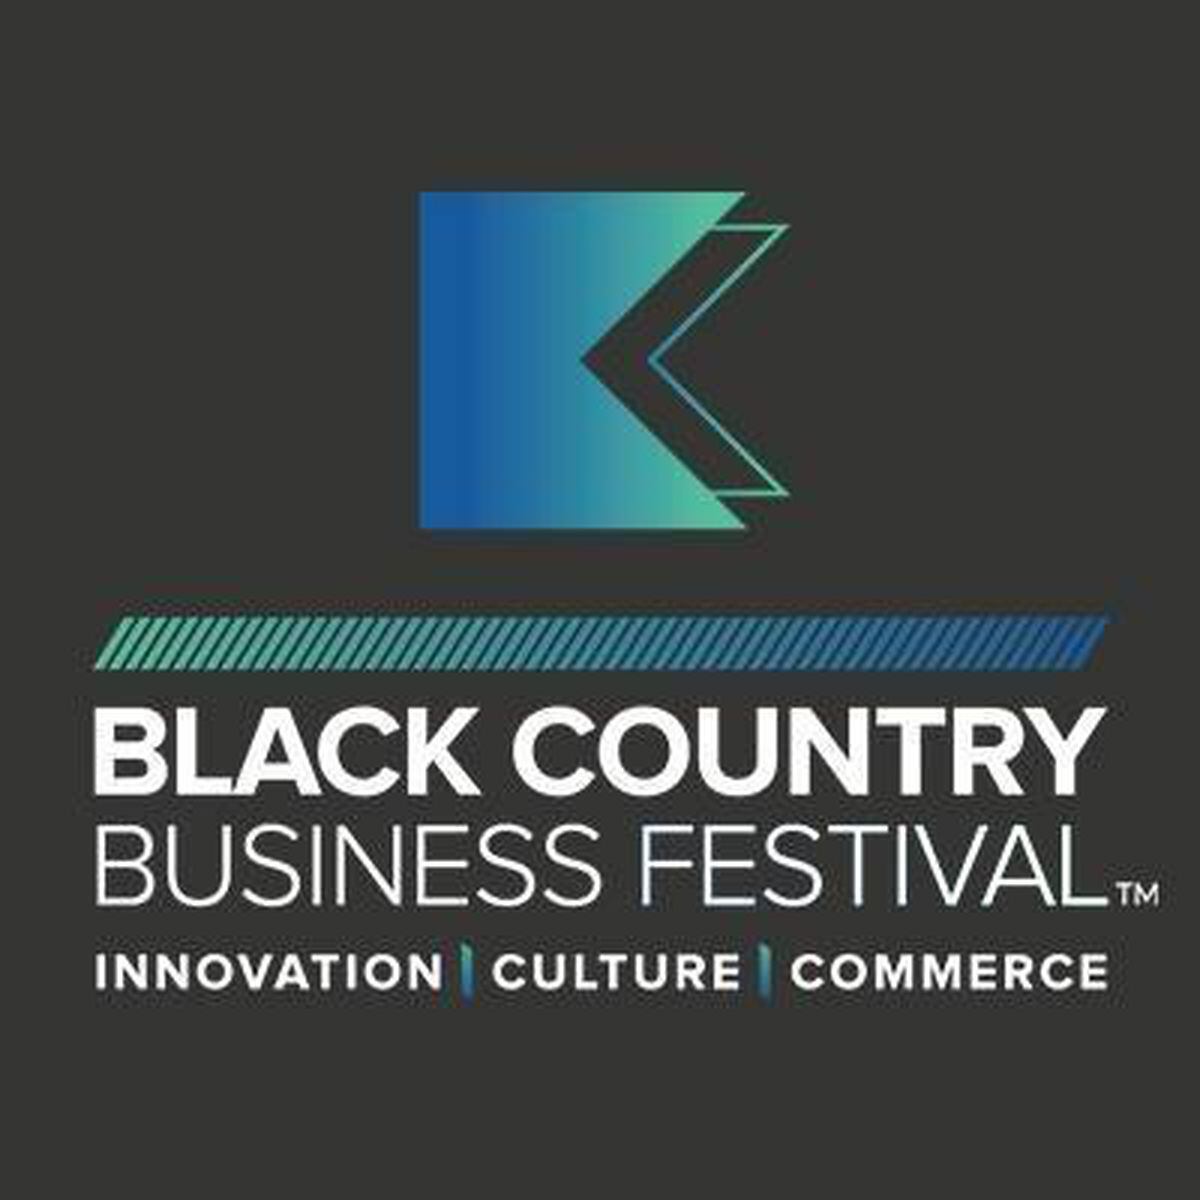 The Black Country Business Festival will see 122 events taking place over the next fortnight